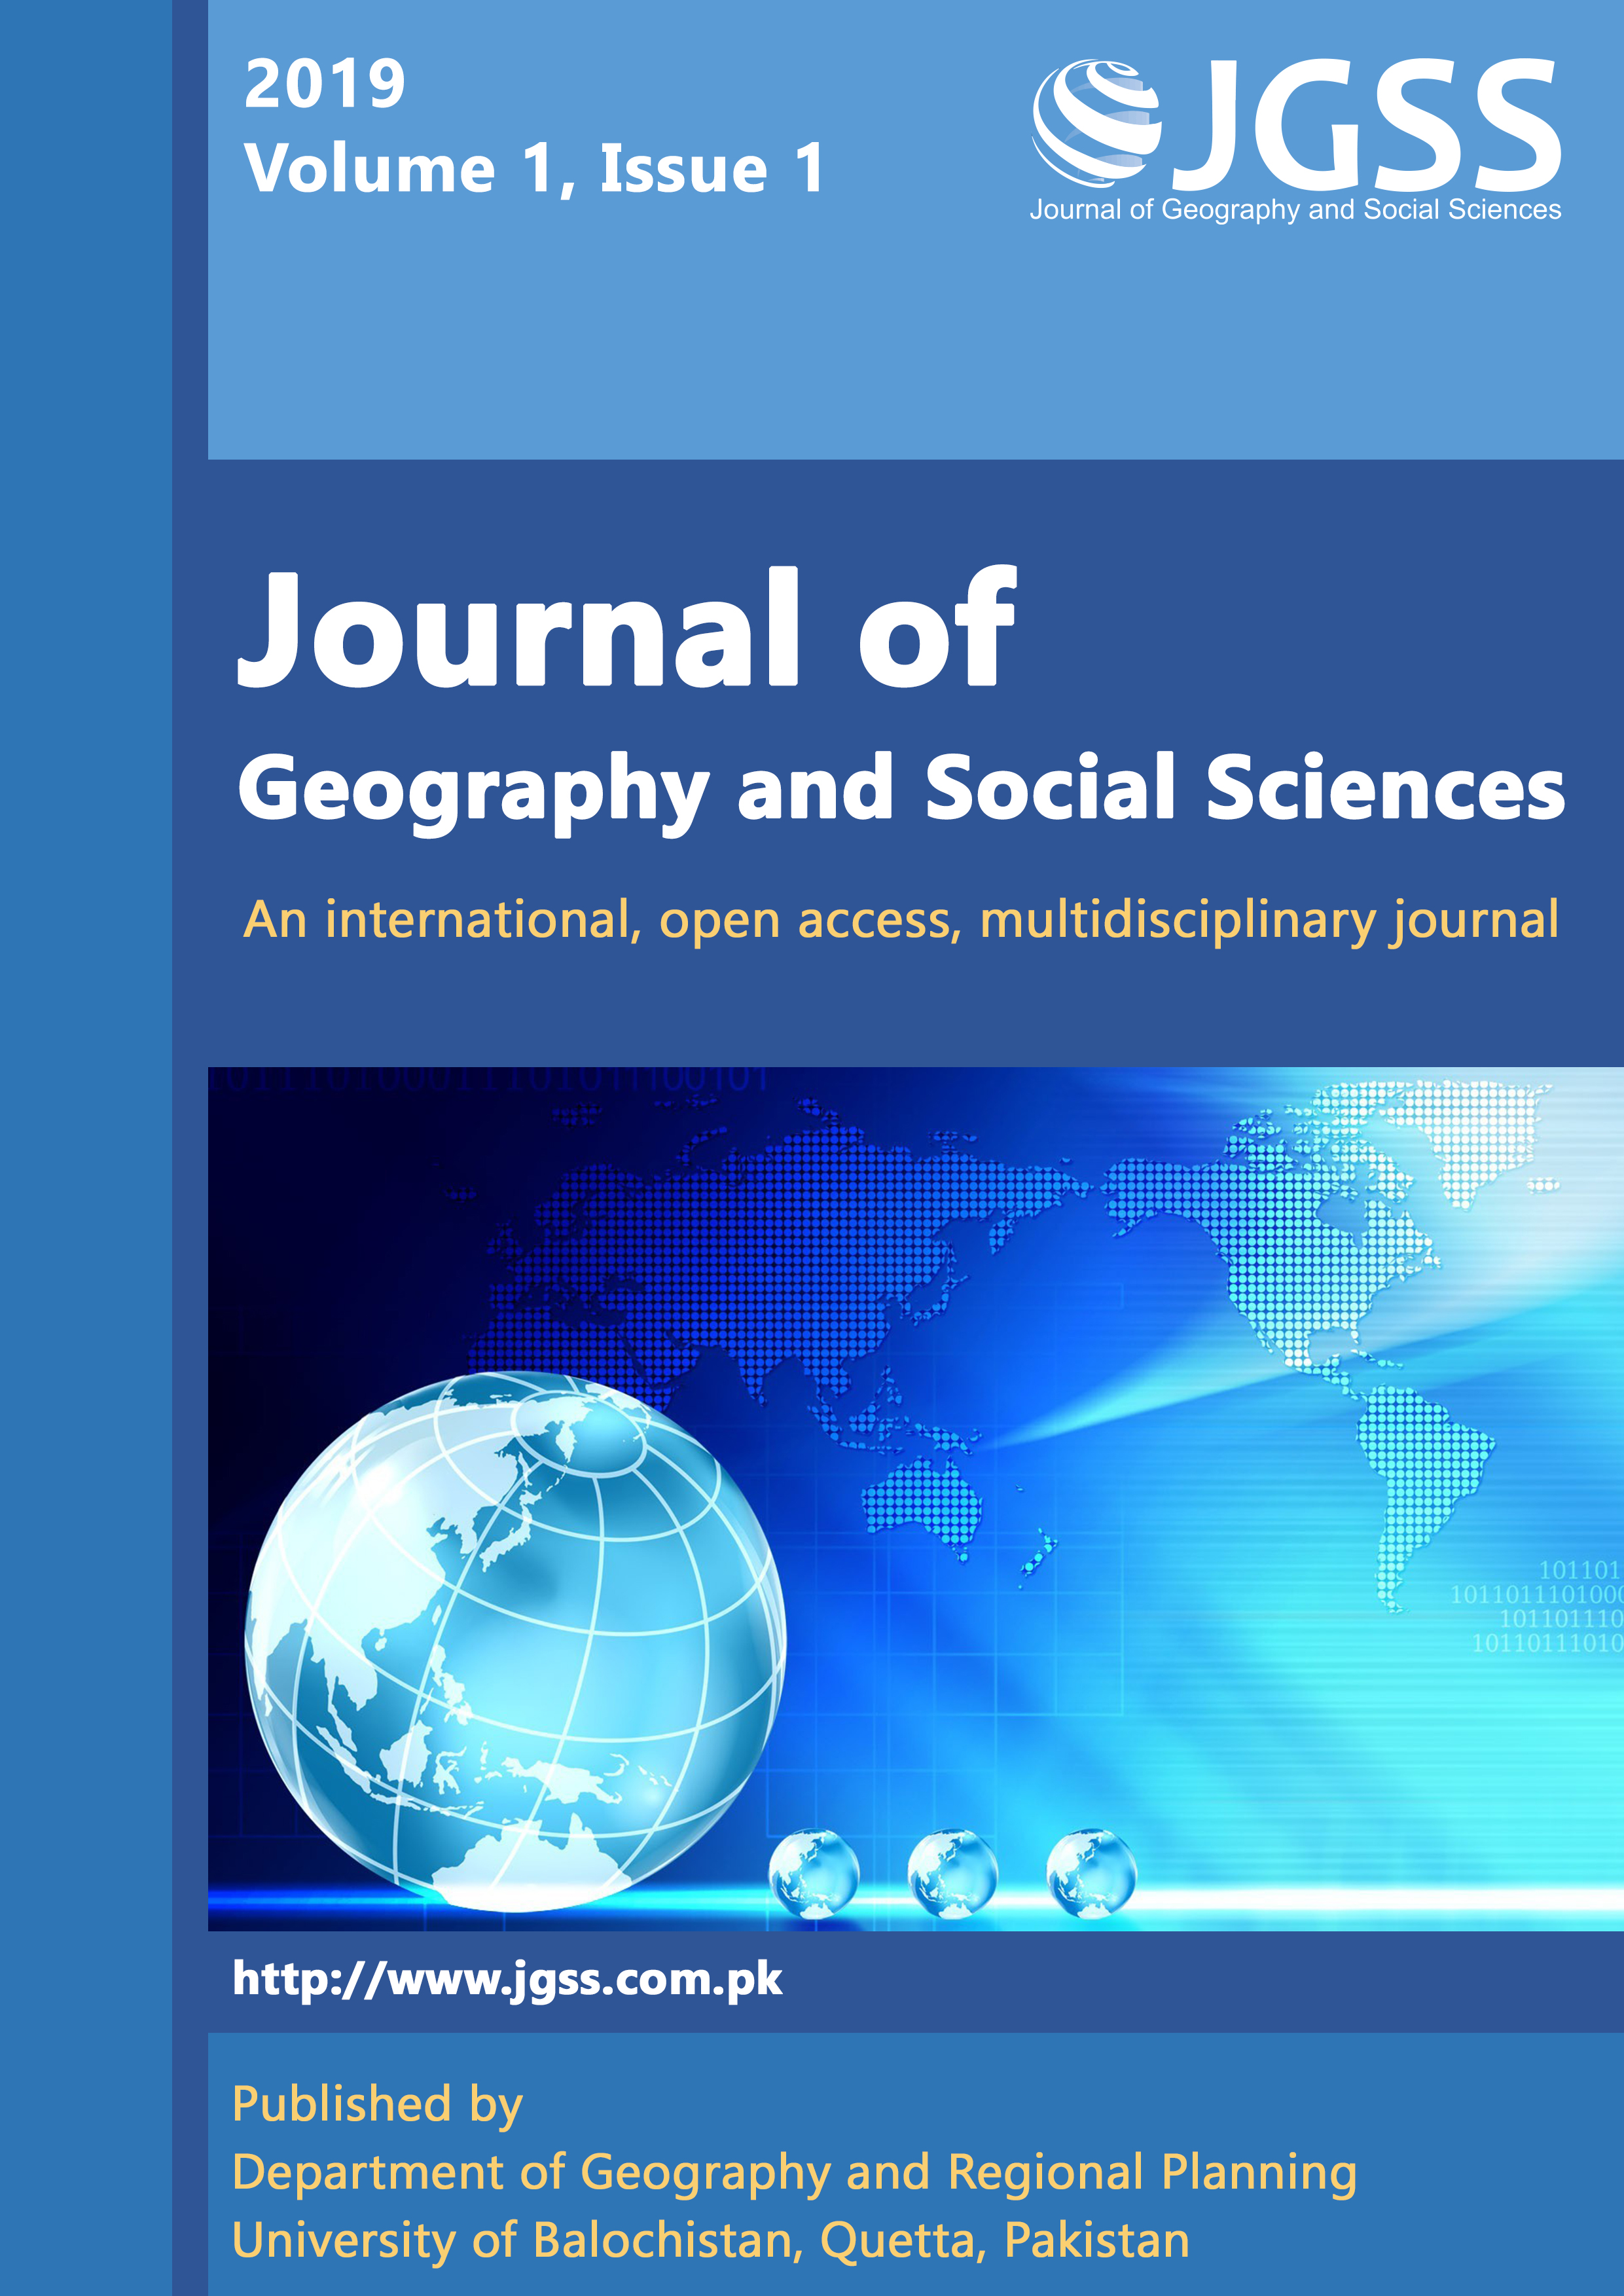 					View Vol. 1 No. 1 (2019): Journal of Geography and Social Sciences 
				